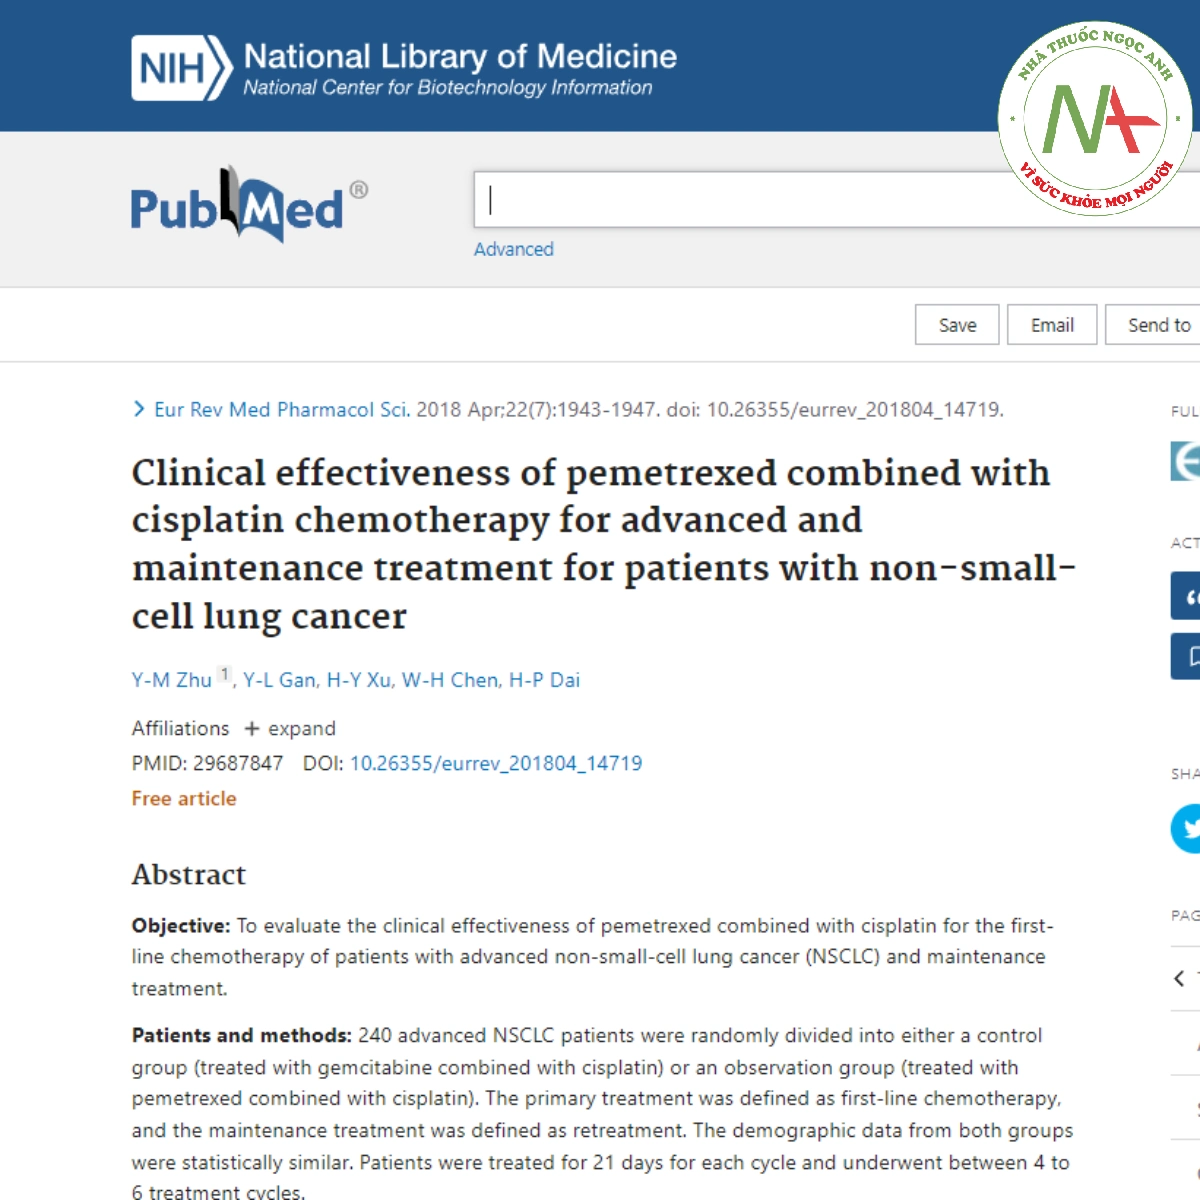 Clinical effectiveness of pemetrexed combined with cisplatin chemotherapy for advanced and maintenance treatment for patients with non-small-cell lung cancer